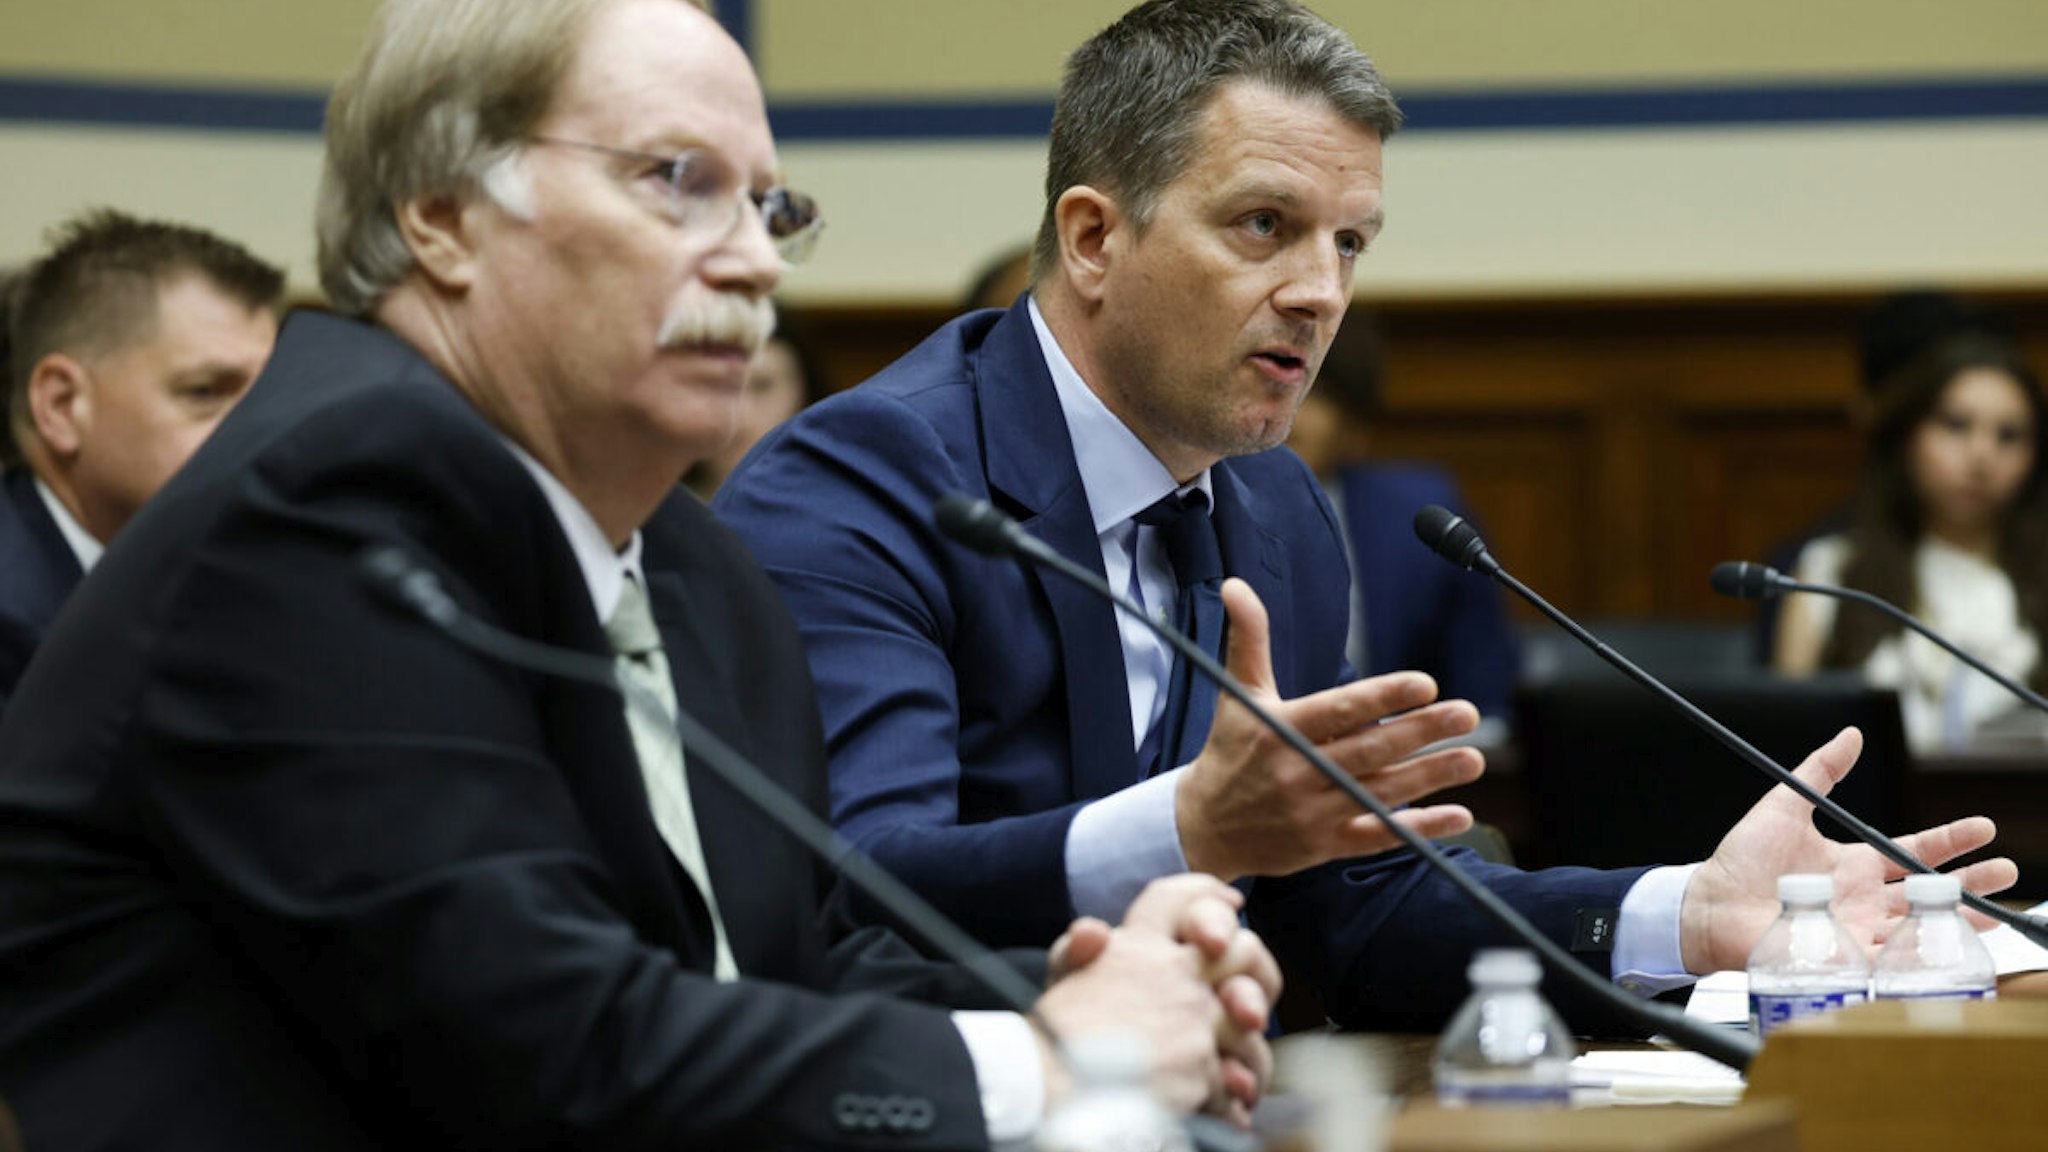 Dr. Kristian Andersen, from Scripps Research speaks alongside Dr. Robert Garry, a Professor at Tulane University School of Medicine, at a hearing with the Select Subcommittee on the Coronavirus Pandemic on Capitol Hill on July 11, 2023 in Washington, DC.